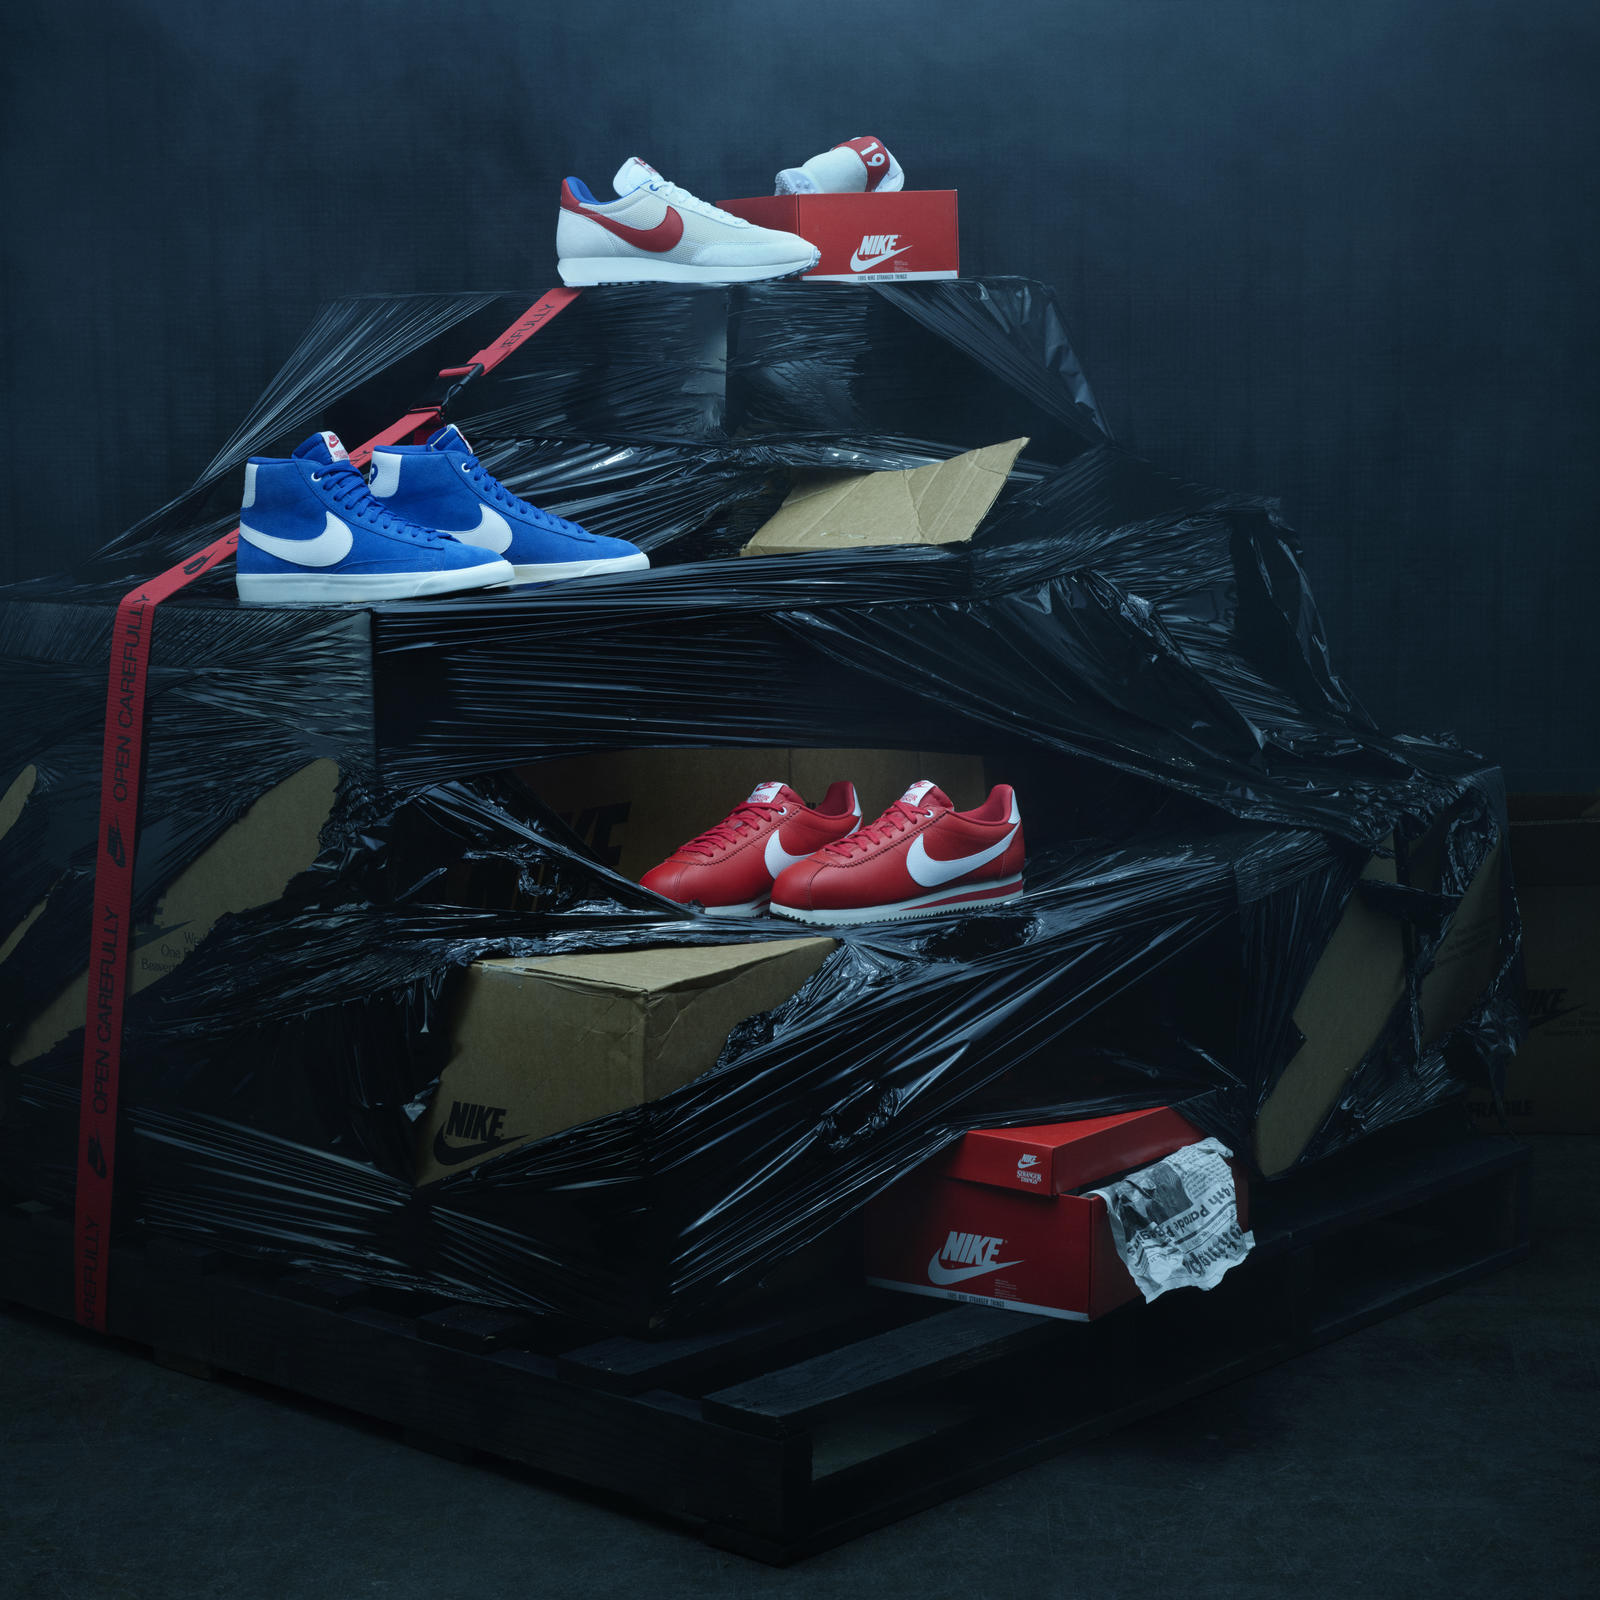 nike stranger things collection 03 square 1600